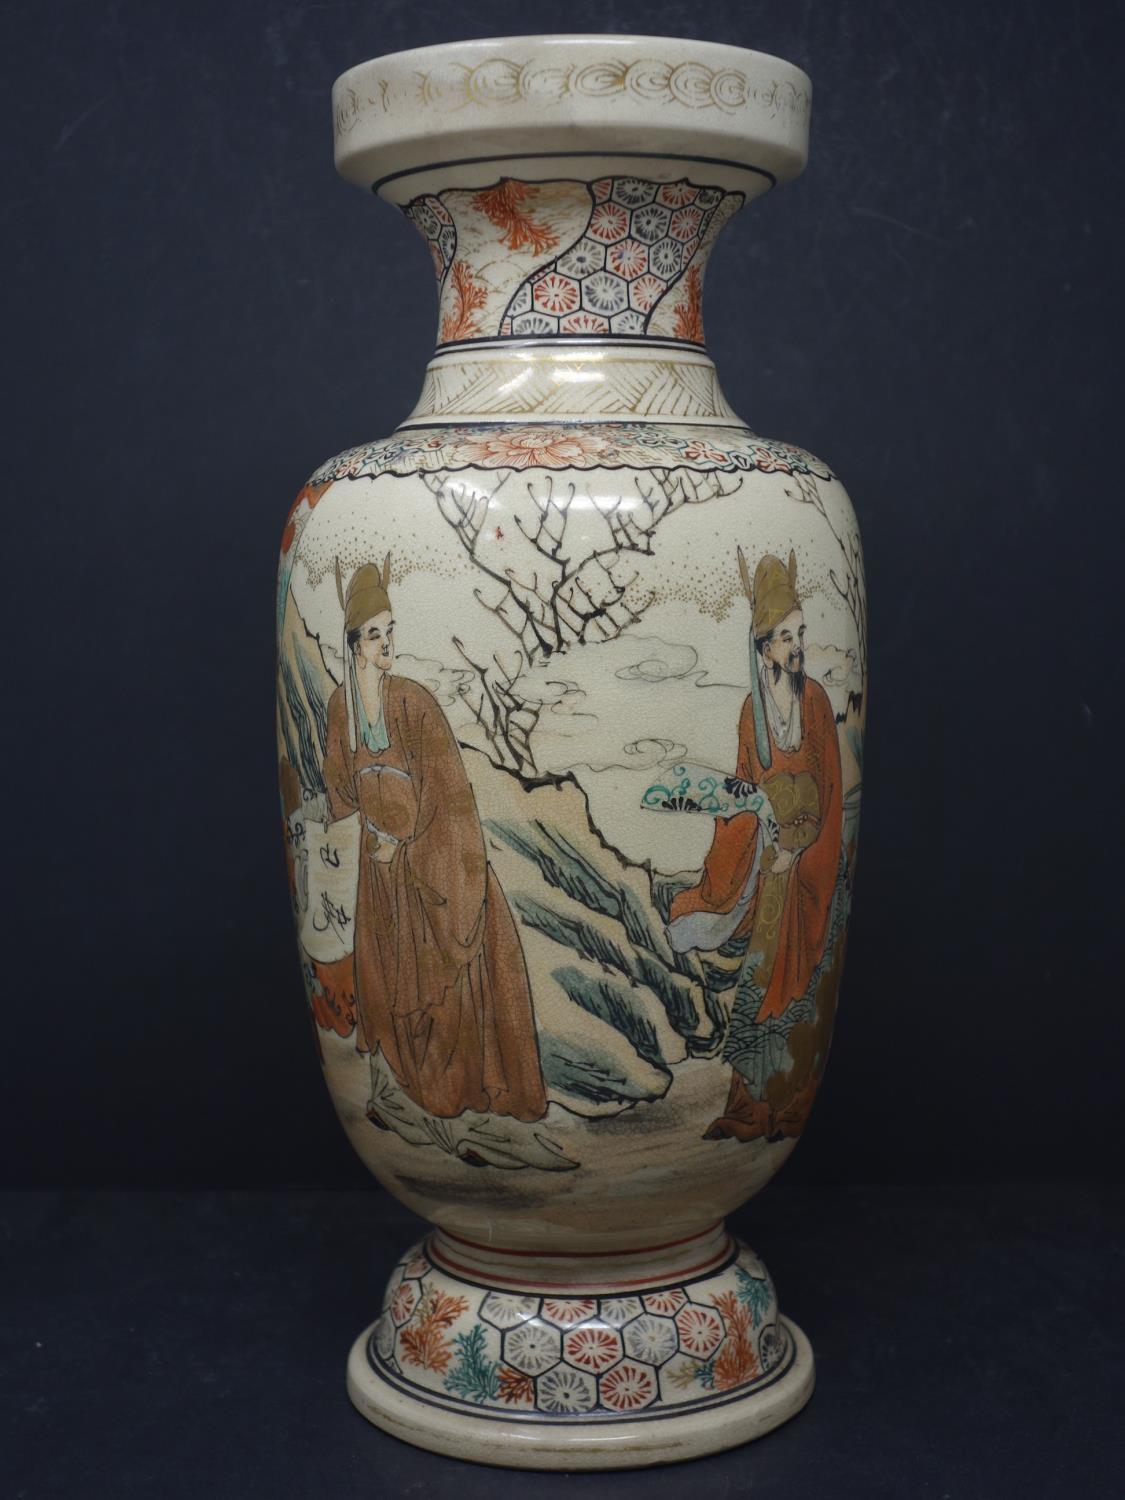 An early 20th century Japanese vase, decorated with a continuous procession of figures in a - Image 3 of 4